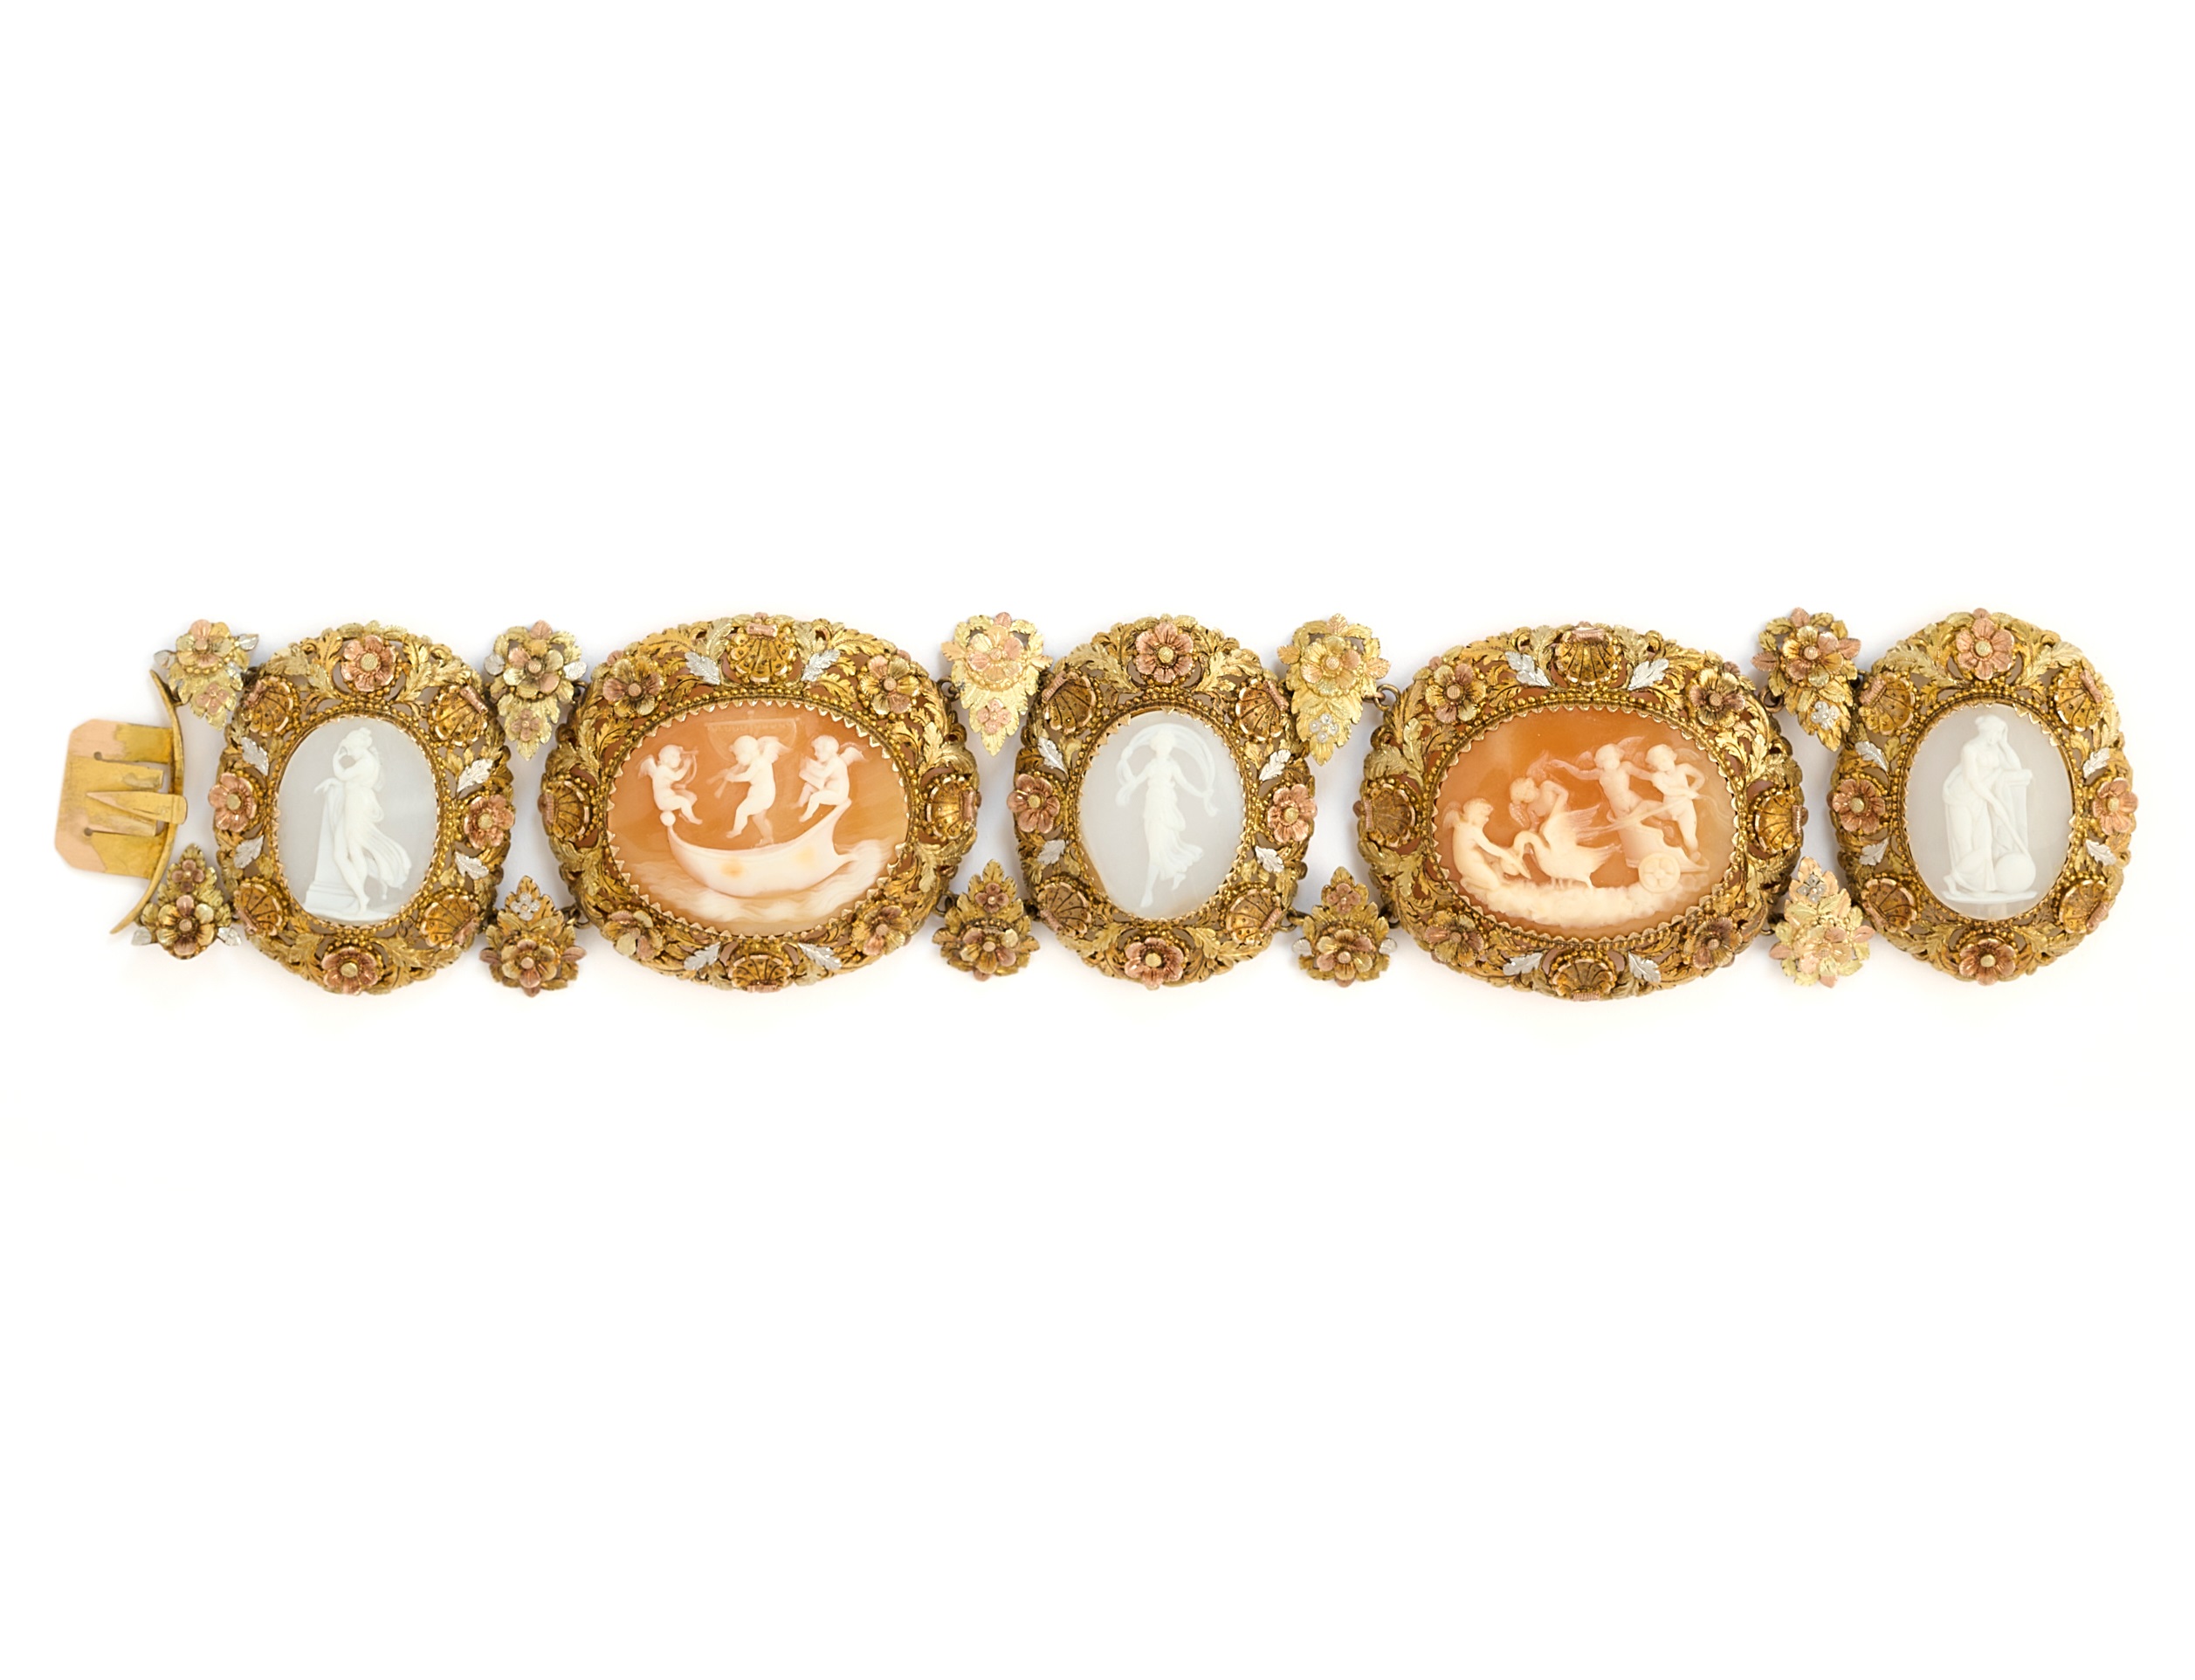 GOLD AND SHELL CAMEO BRACELET, 1820s